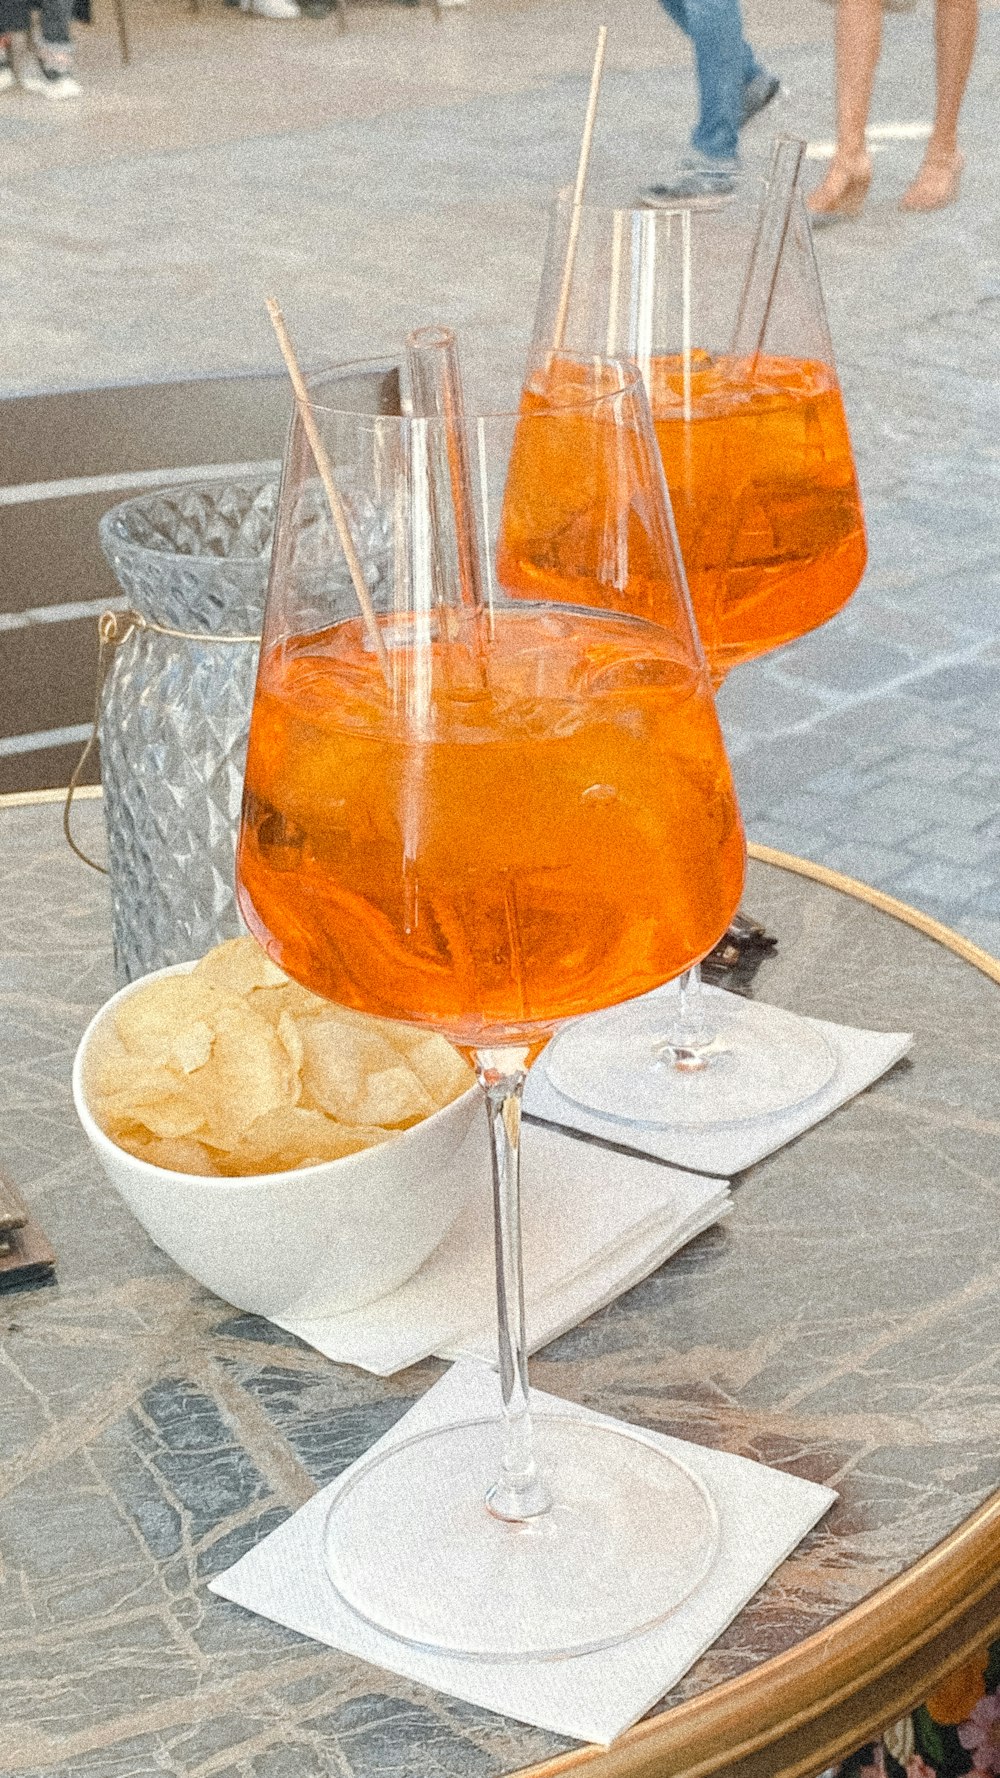 a glass of orange drink with a straw and a bowl of potato chips